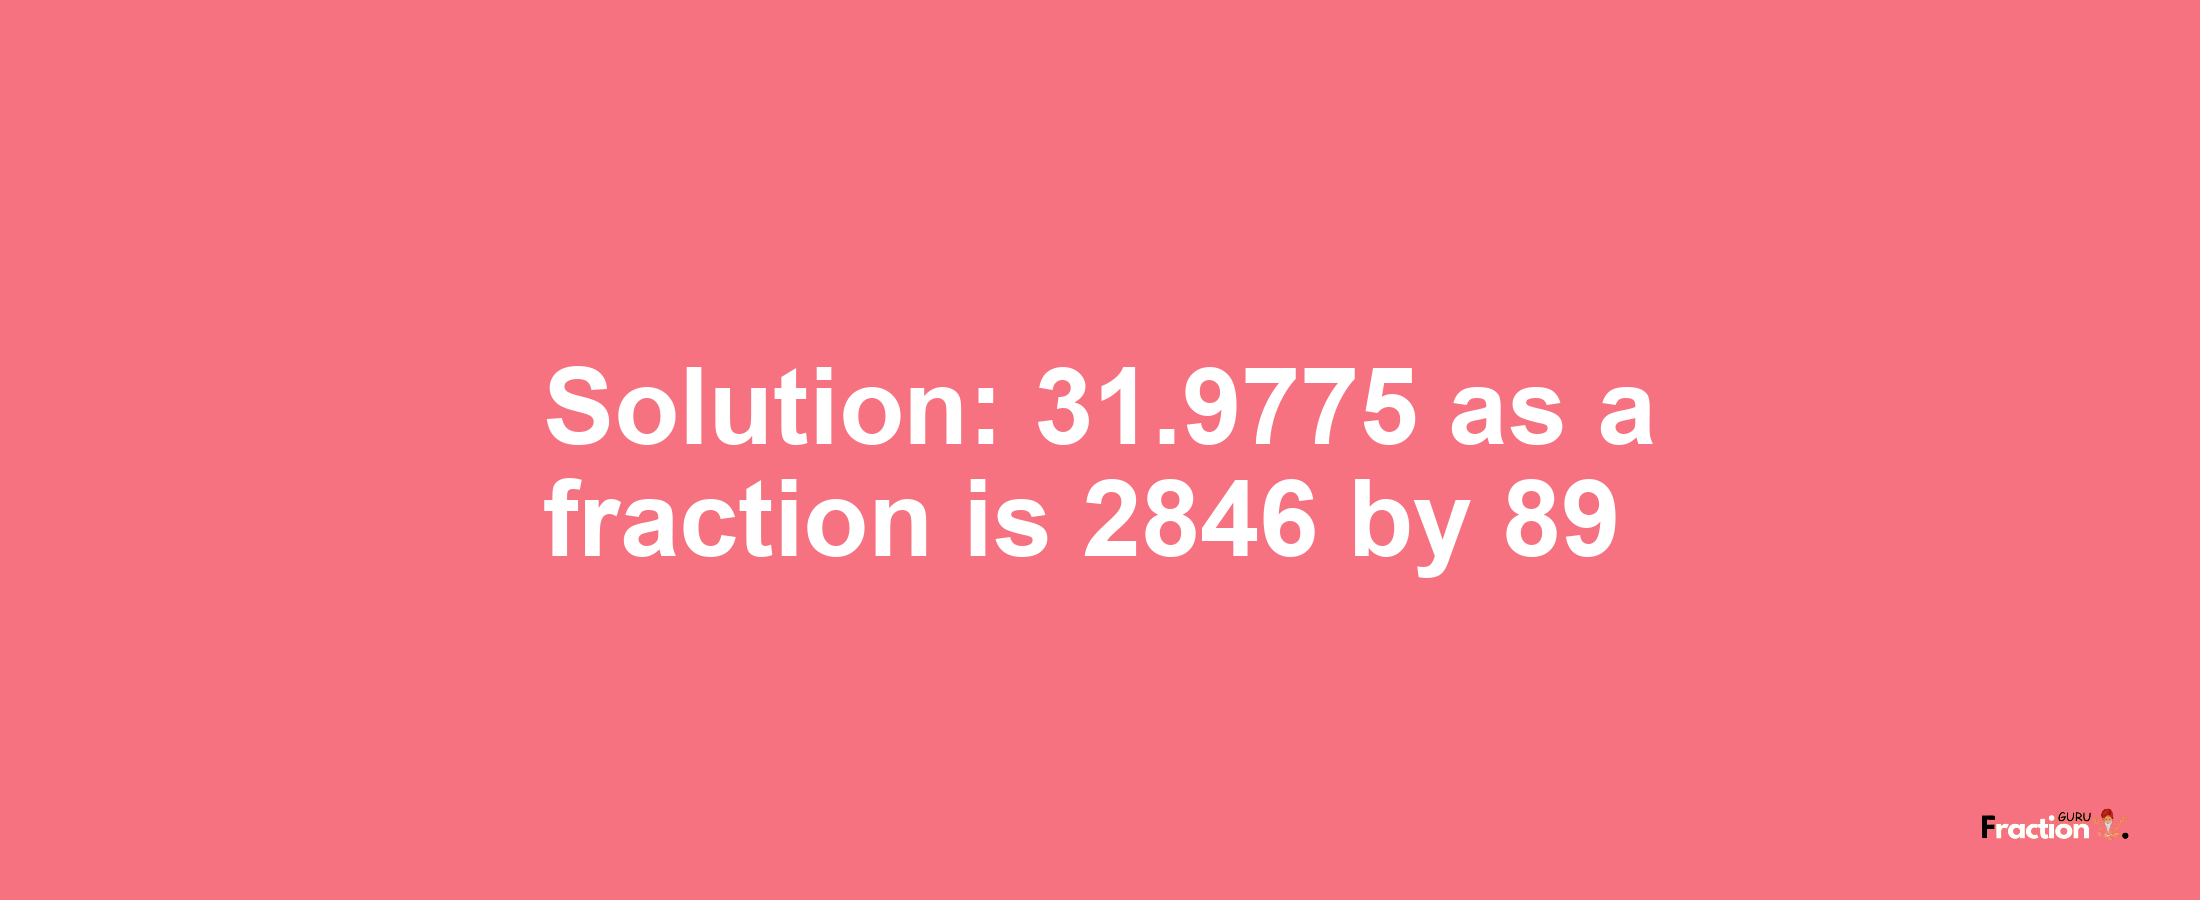 Solution:31.9775 as a fraction is 2846/89